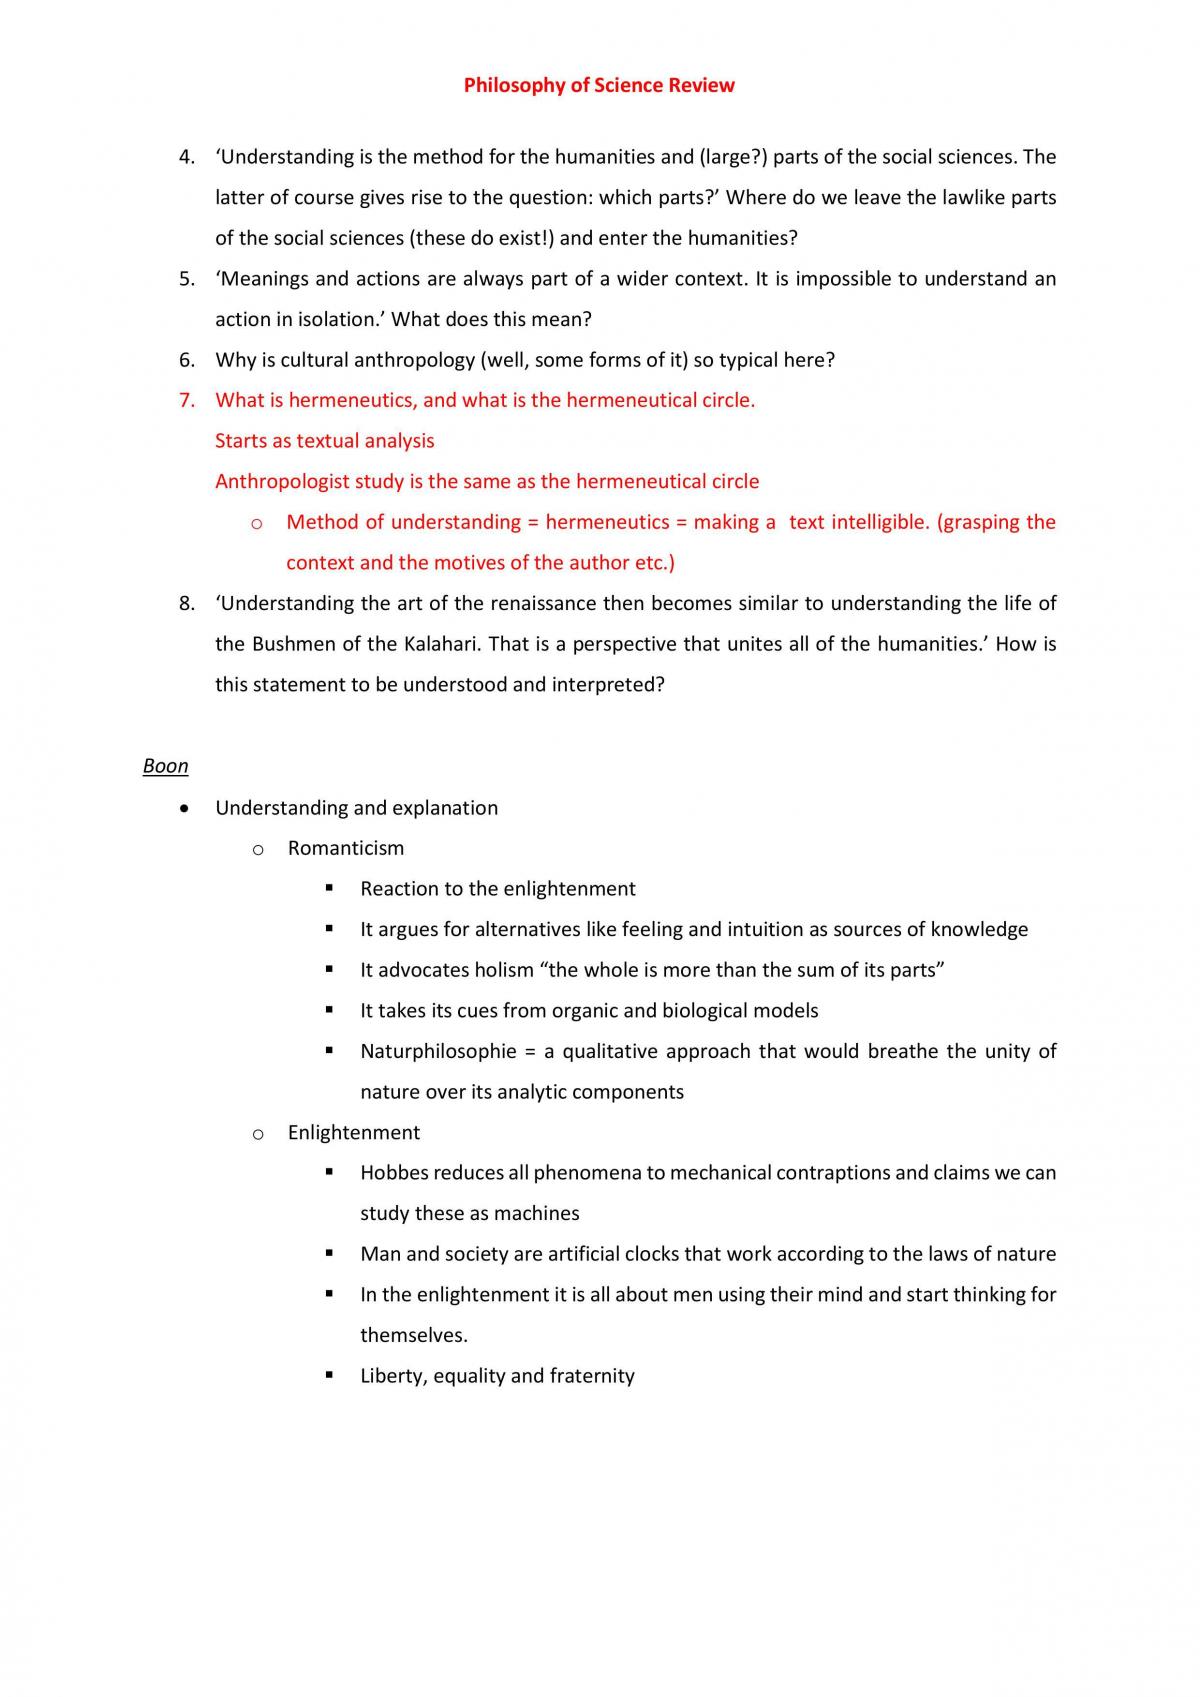 Full notes for Philosophy of Science - Page 27